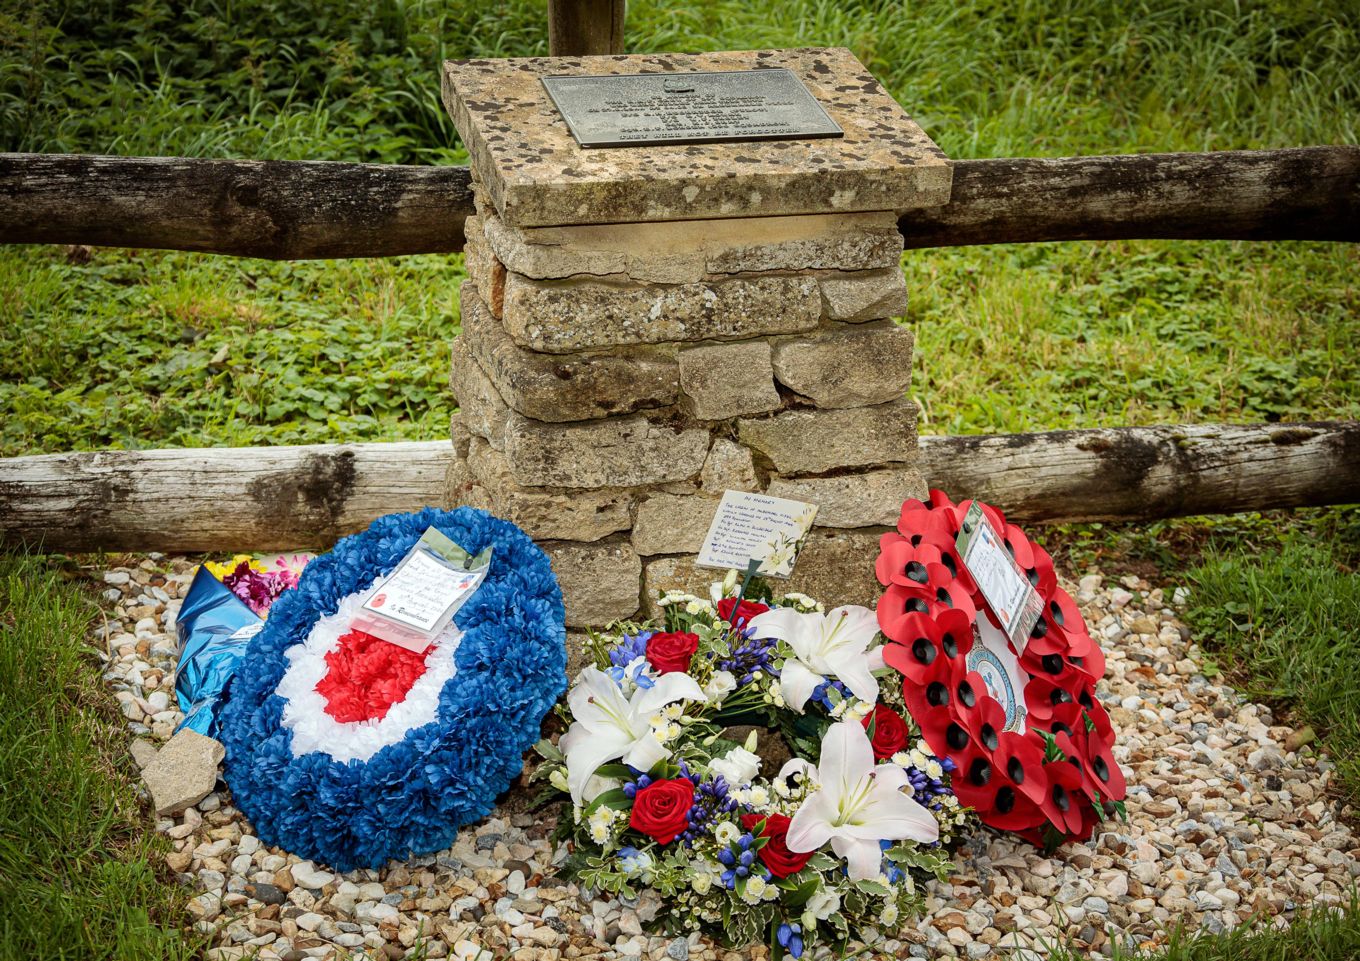 Wreaths placed around the memorial cairn, commemorating the lives of the Albemarle crew